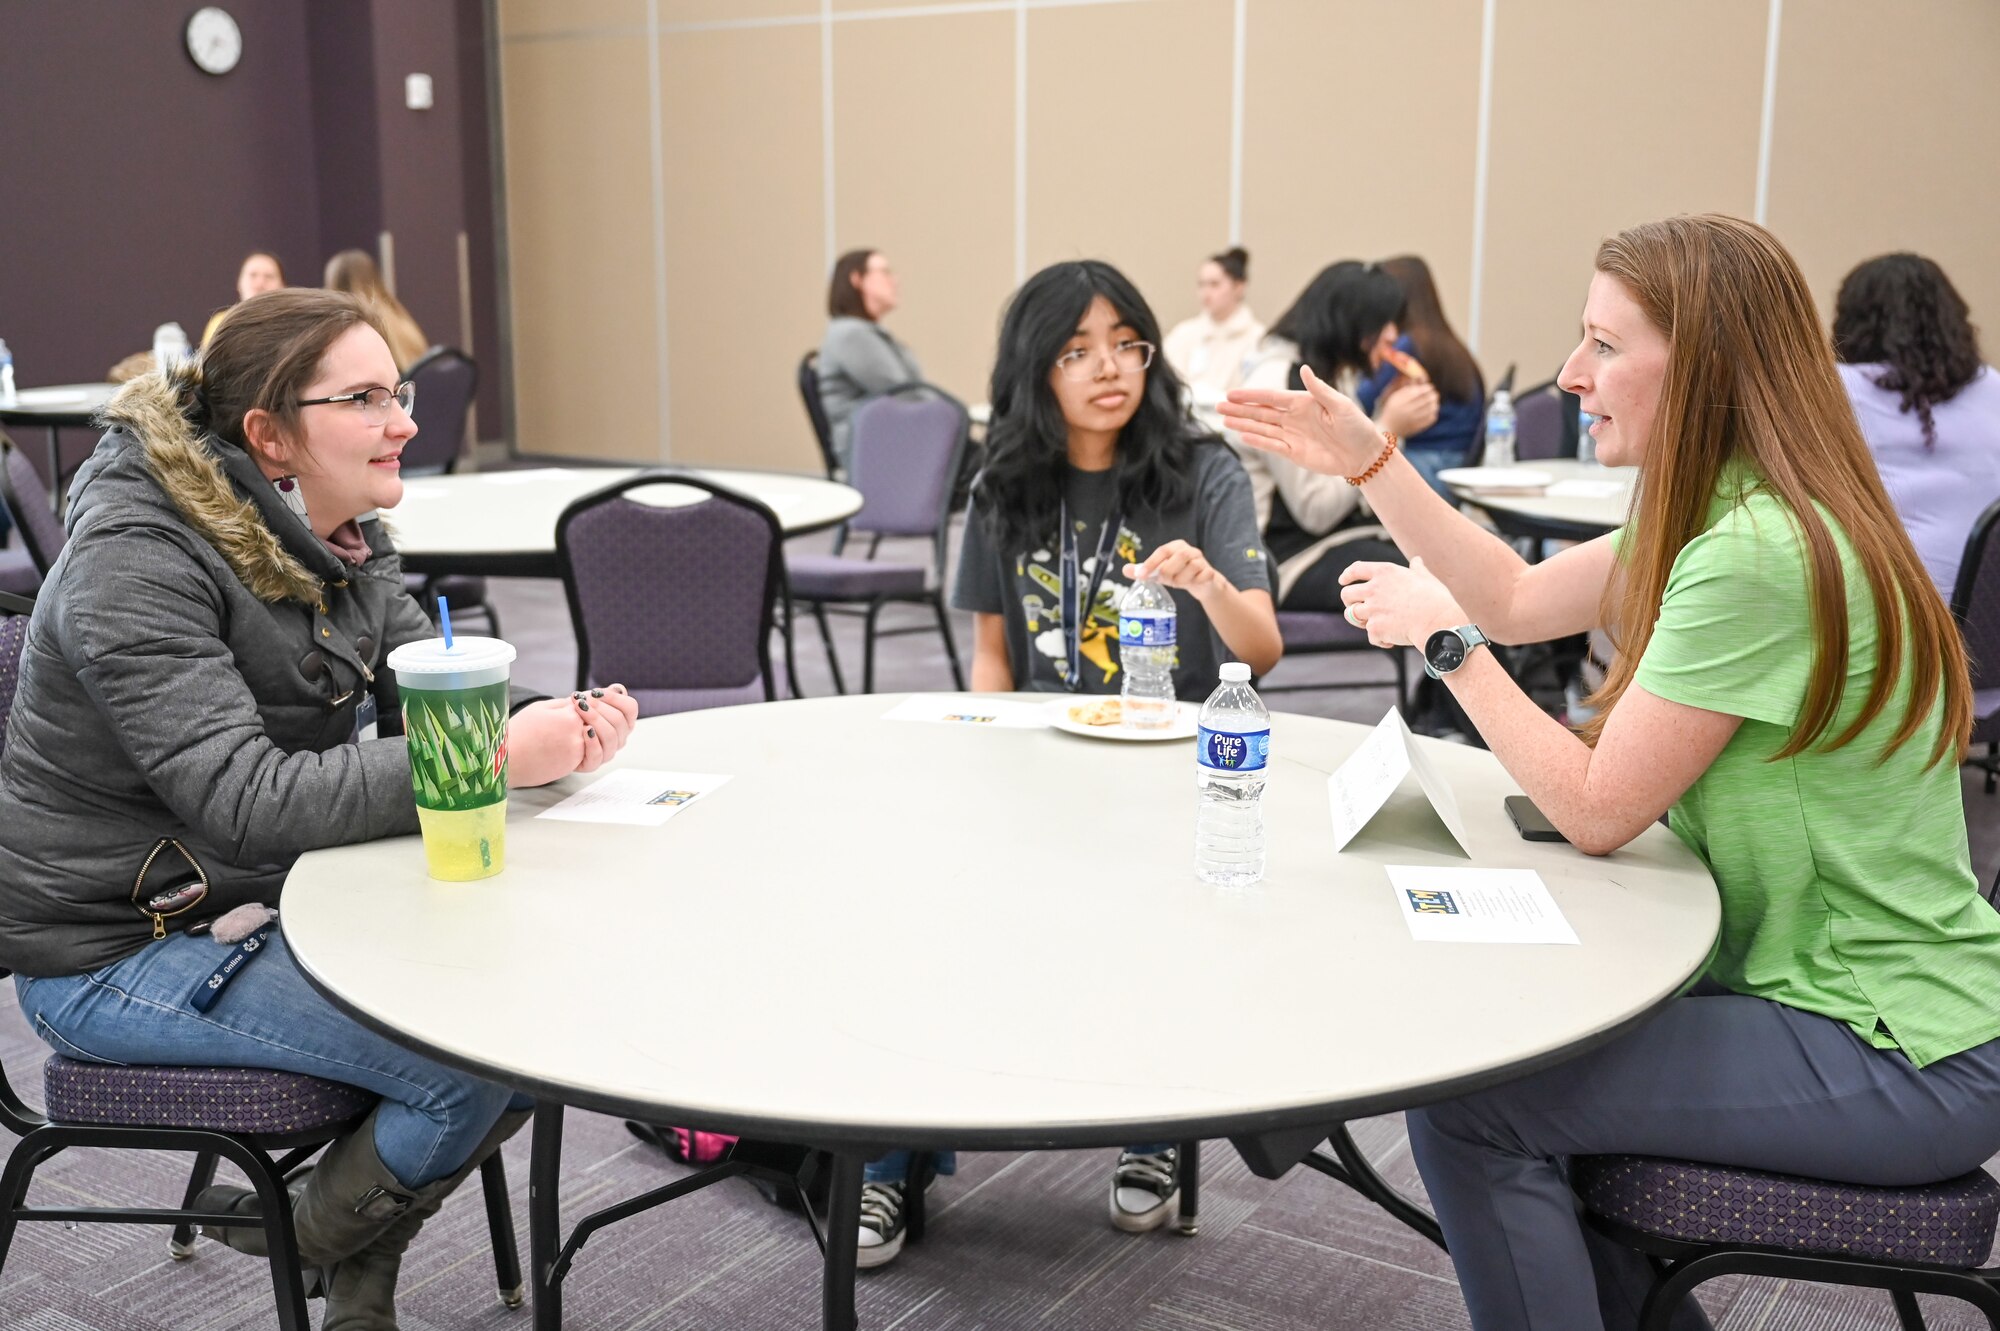 Tabby Hyer, a systems engineer at Air Force Lifecycle Management Center at Hill Air Force Base, Utah, meets with female high school students from NUAMES High School in Layton, during a Science, Technology, Engineering and Math (STEM) event March 30, 2023.